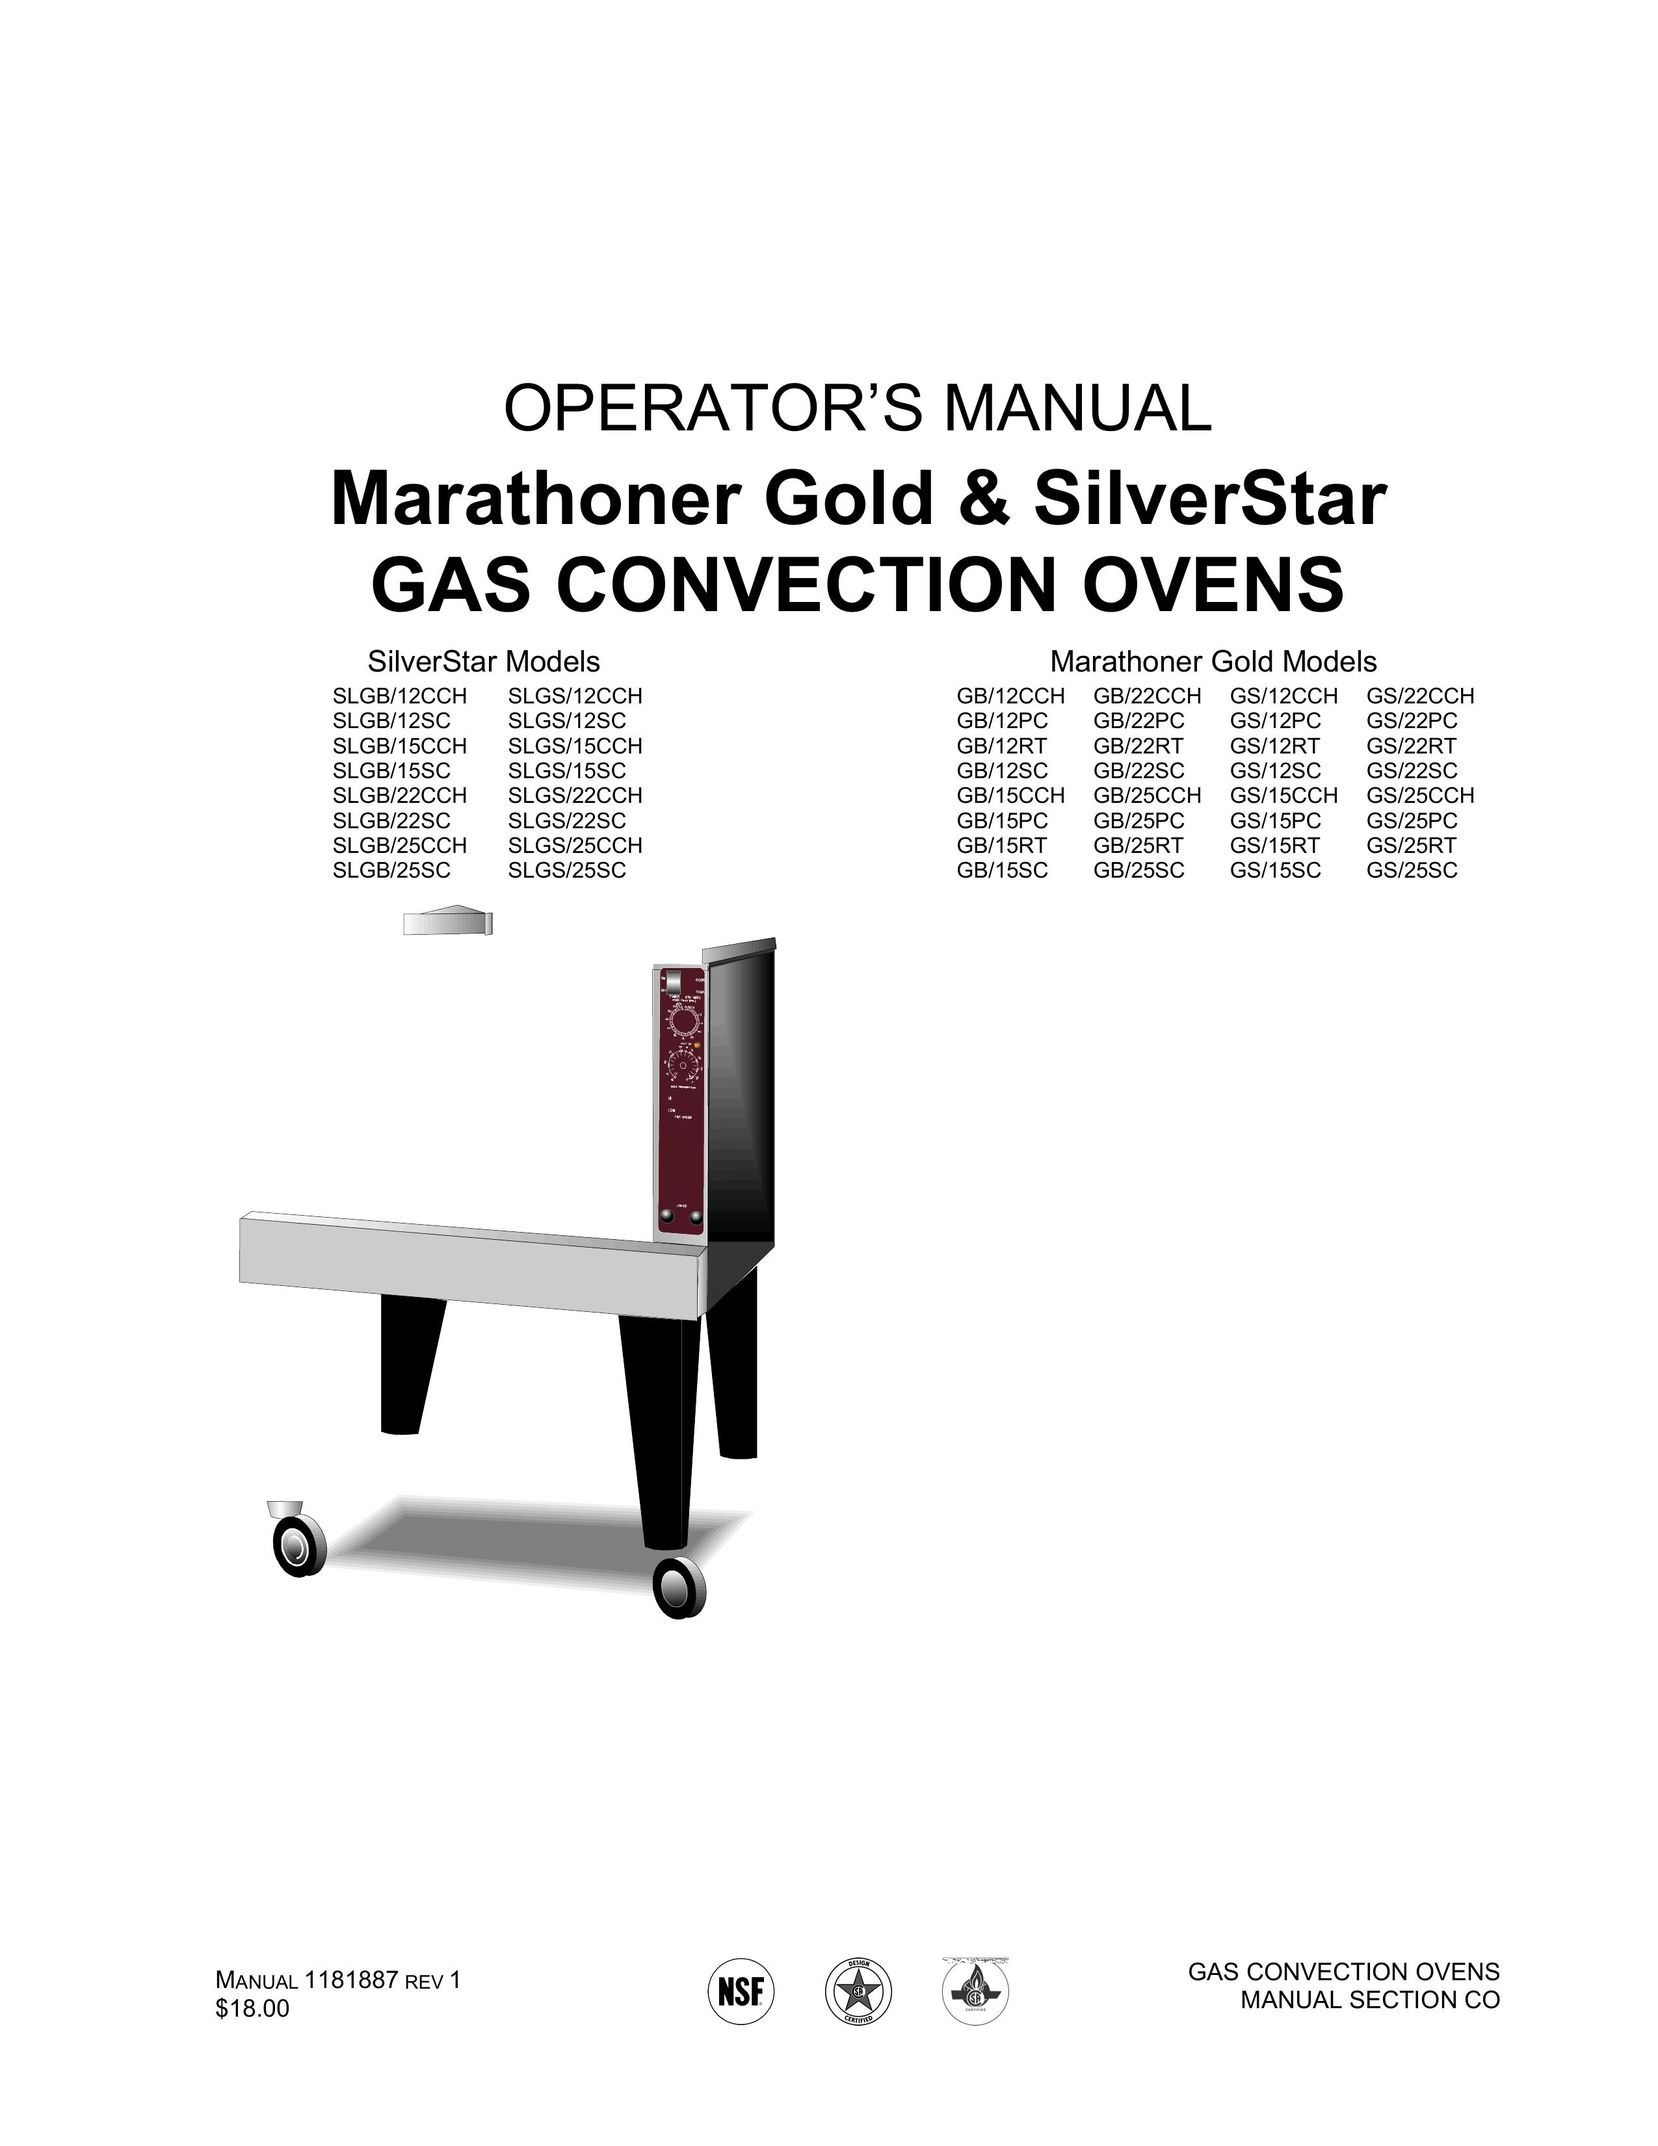 Southbend SLGS/12CCH Oven User Manual